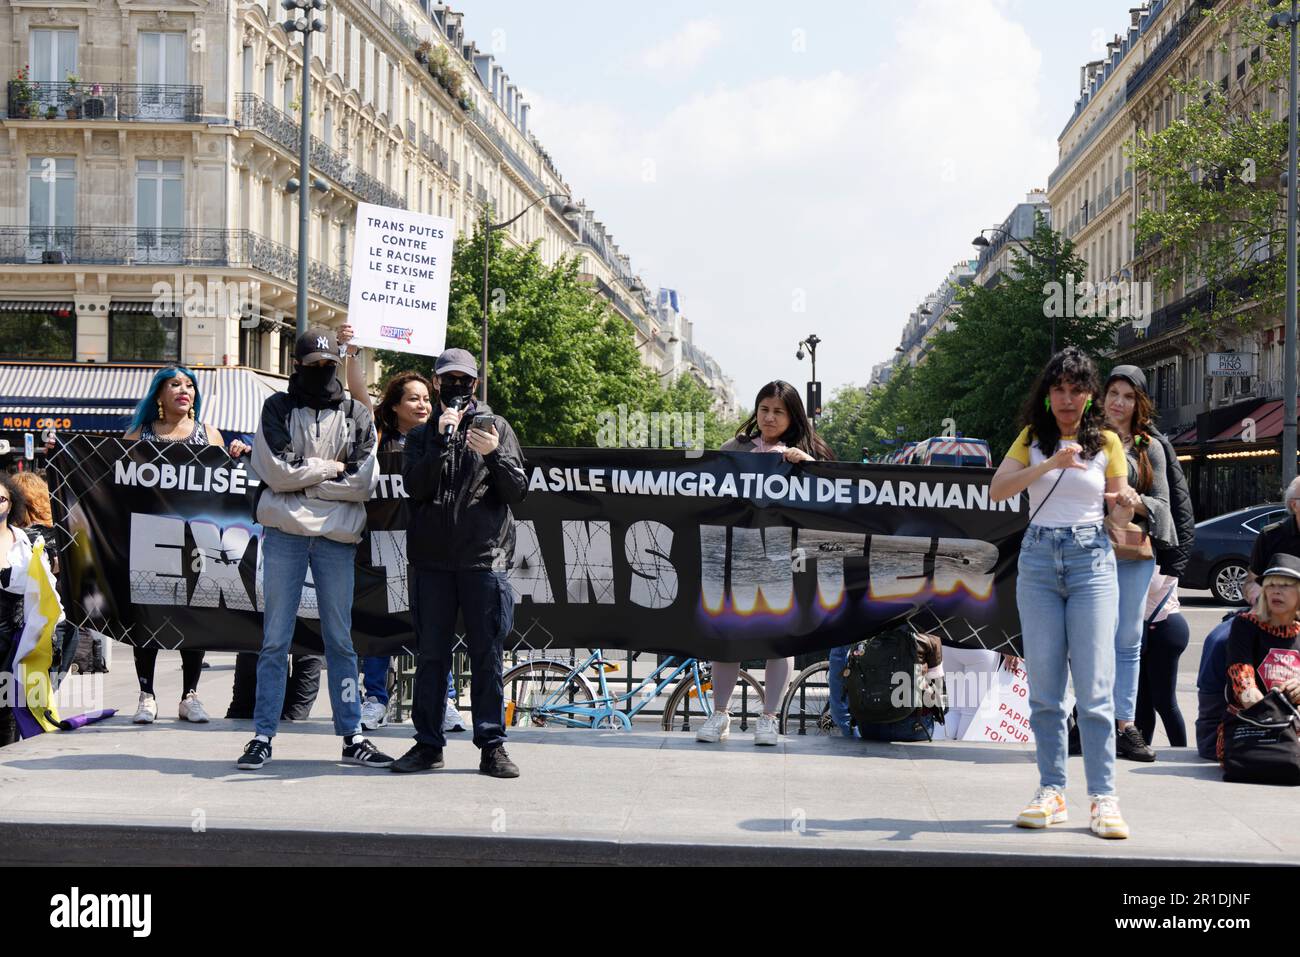 Paris, France. 13th May, 2023. ExisTransInter demonstration against the Darmanin law on immigration and asylum on May 13, 2023 in Paris, France. Credit: Bernard Menigault/Alamy Live News Stock Photo